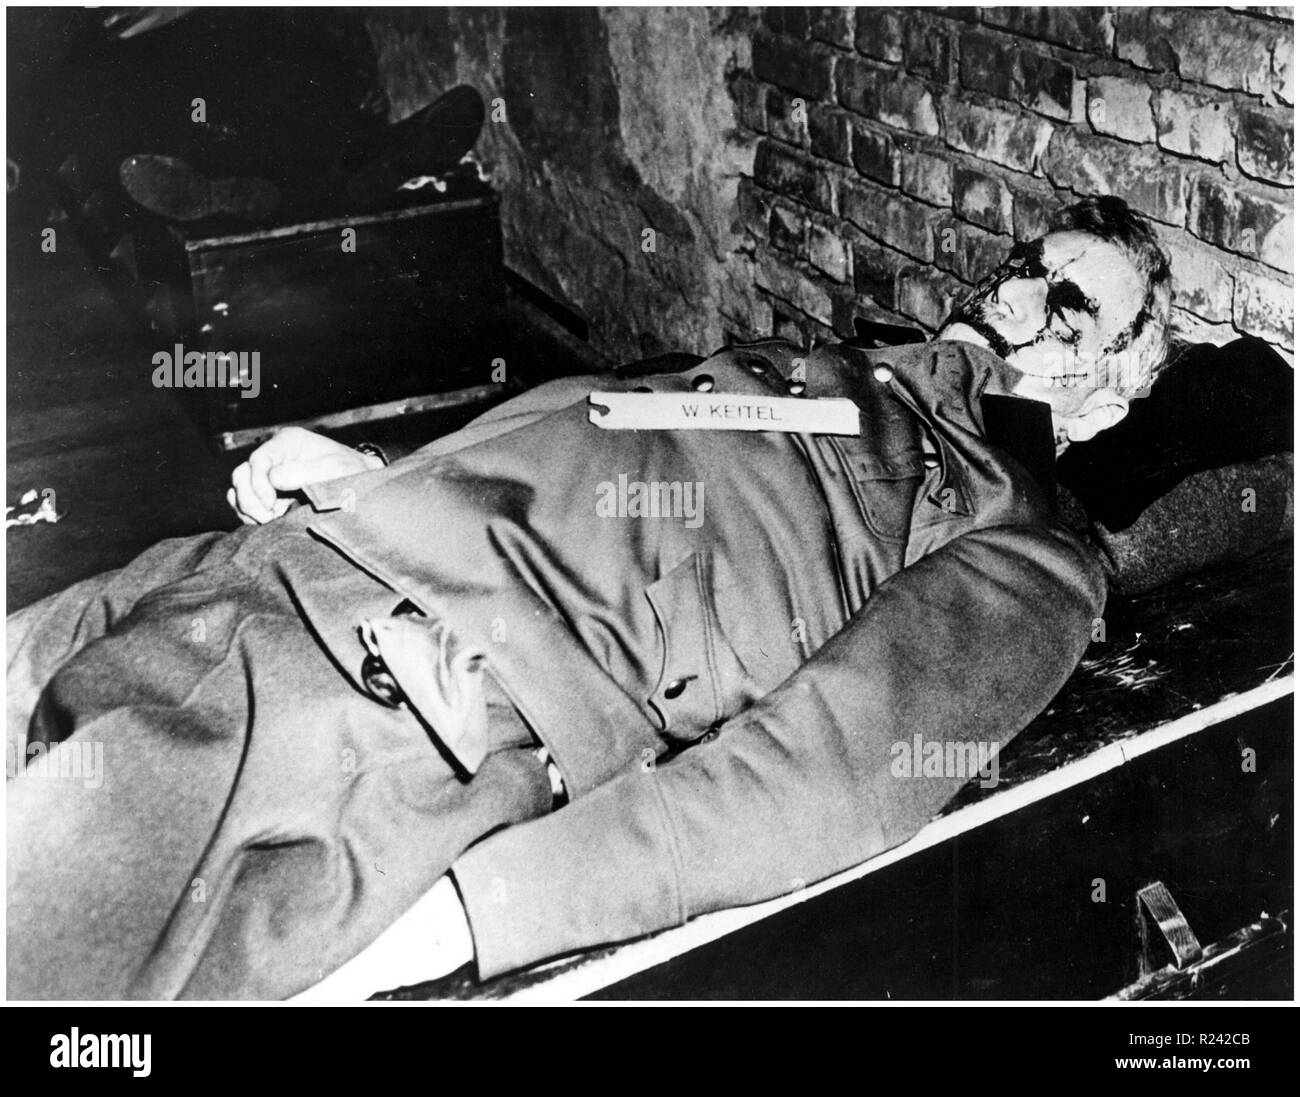 Wilhelm Bodewin Johann Gustav Keitel (22 September 1882 - 16 October 1946) German field marshal who served as chief of the Supreme High Command of the German Armed Forces for most of World War II. The facial blood stains seen in the photo of Keitel's corpse were due to the trapdoor being too small, causing him to suffer head injuries during his hanging Stock Photo